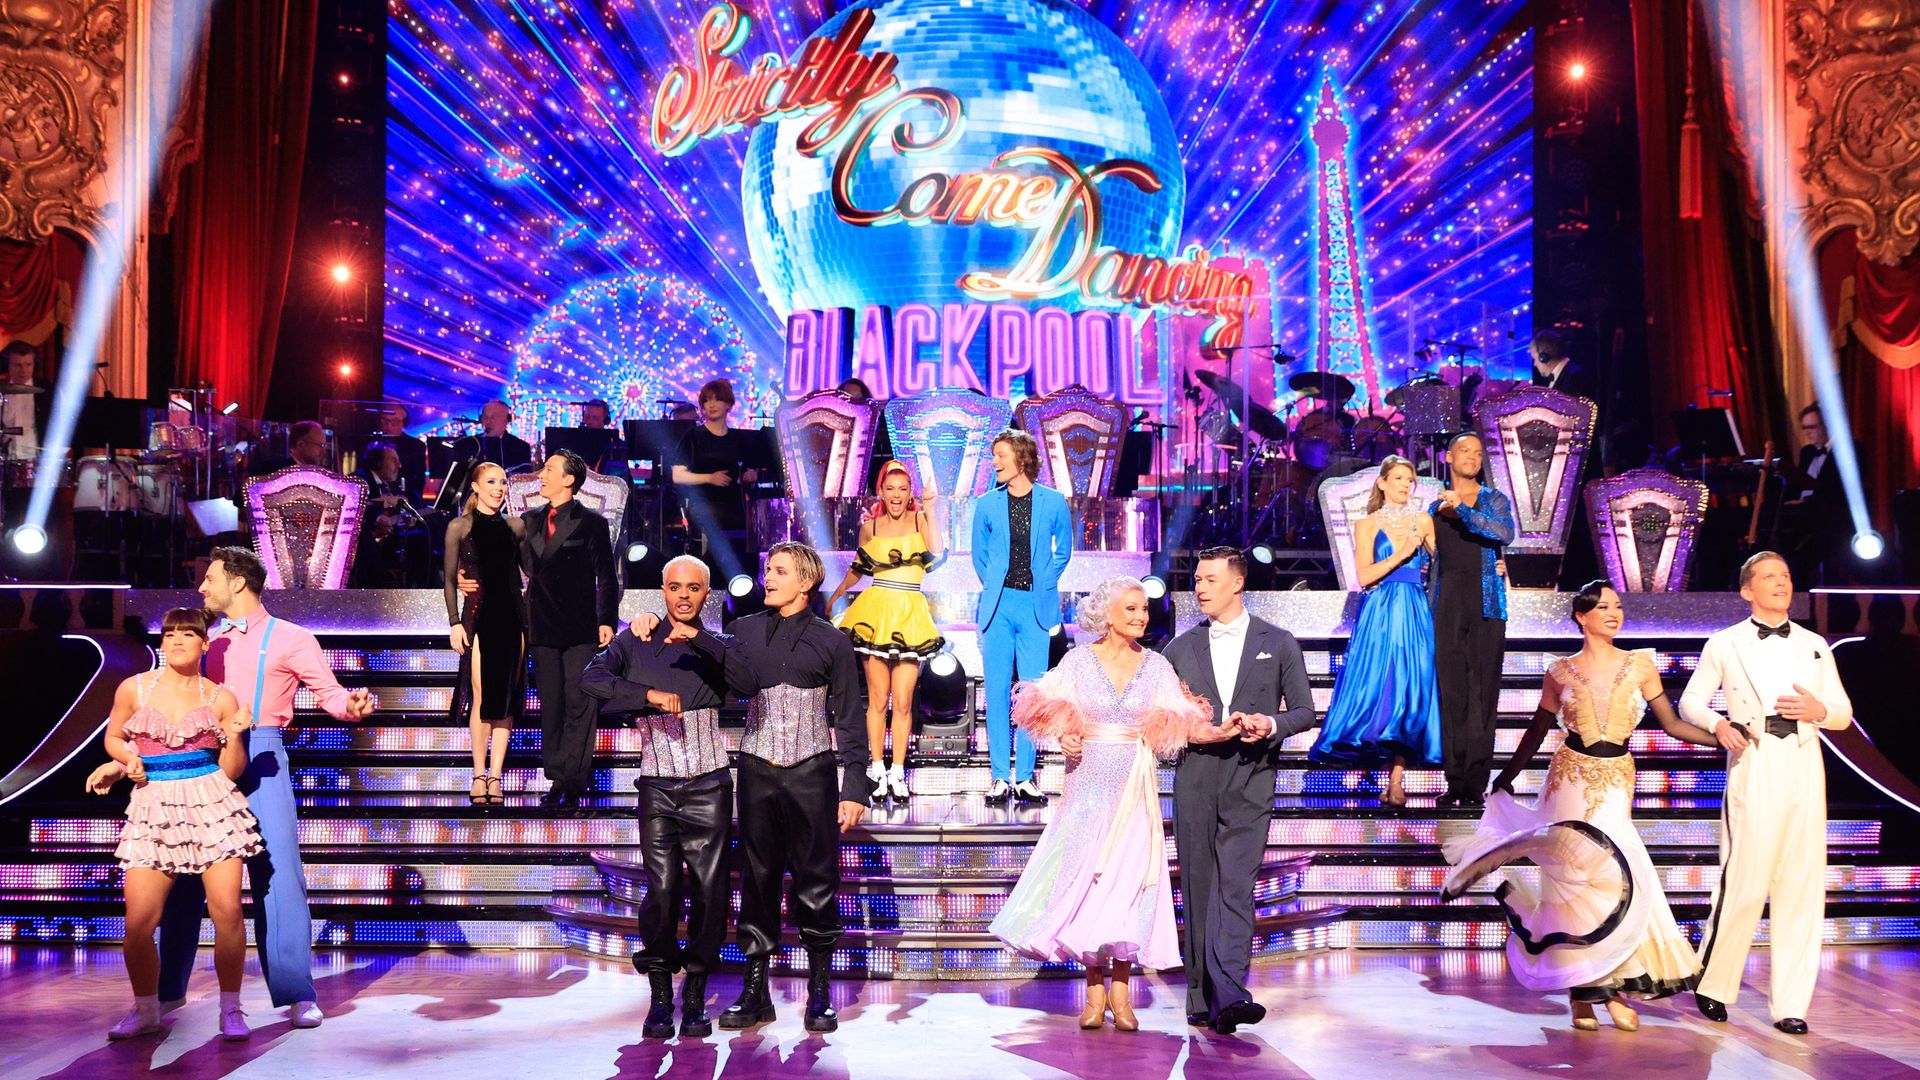 The Strictly Come Dancing 2023 Celebrities and Professional Dancers in Blackpool